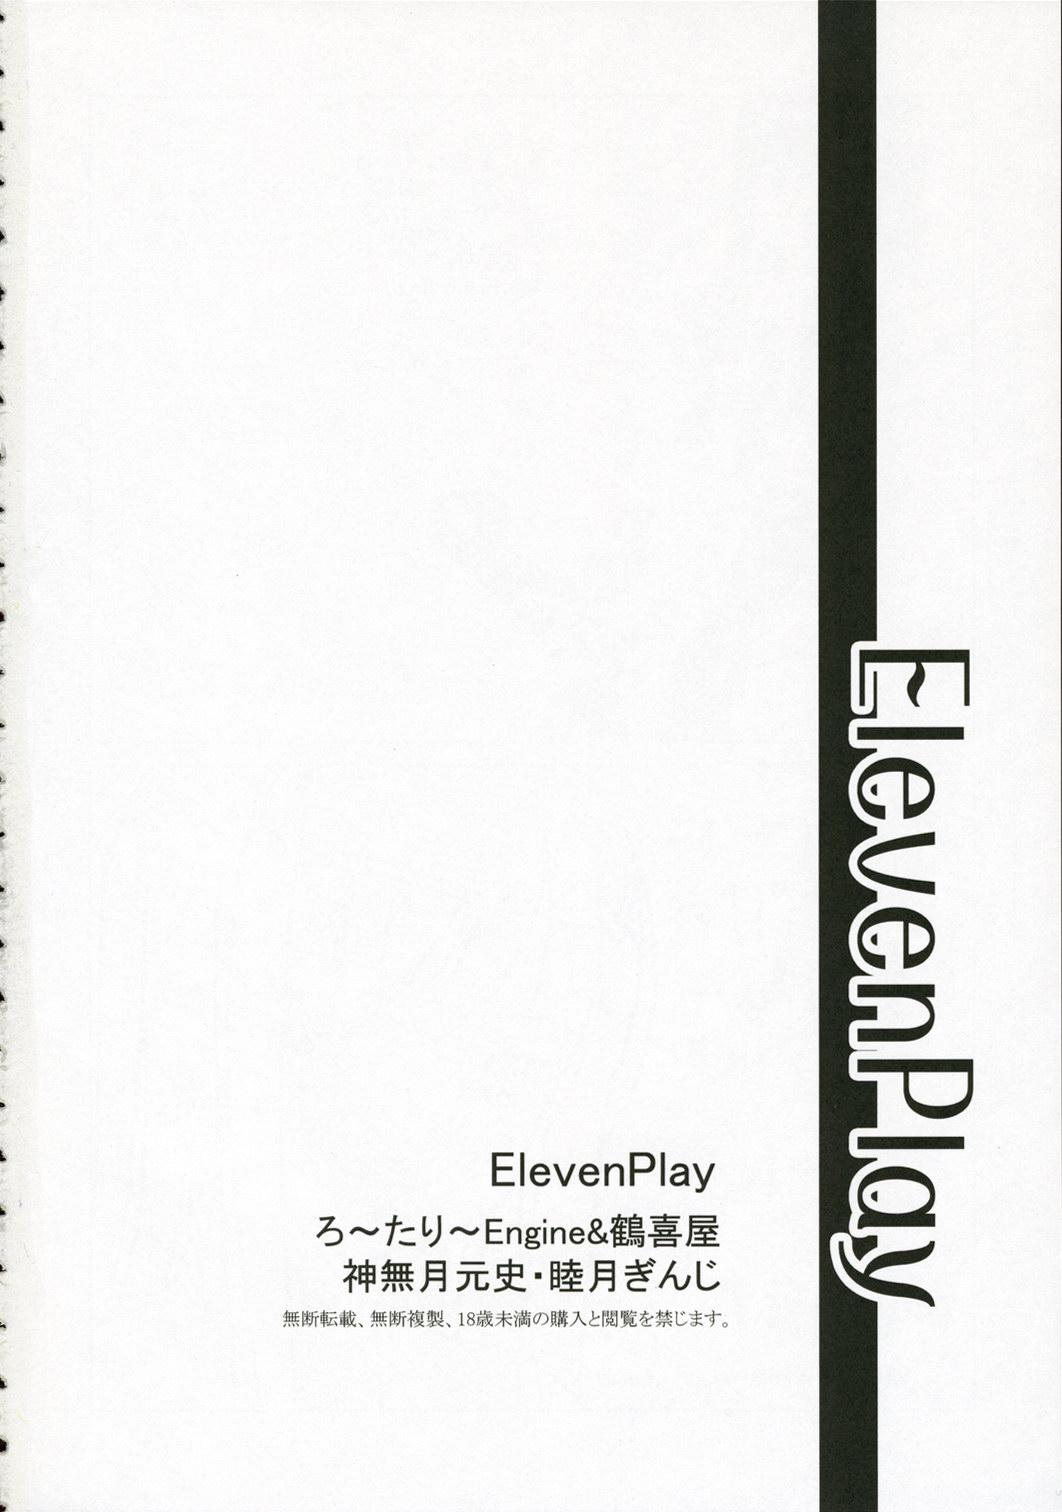 Eleven*Play 24